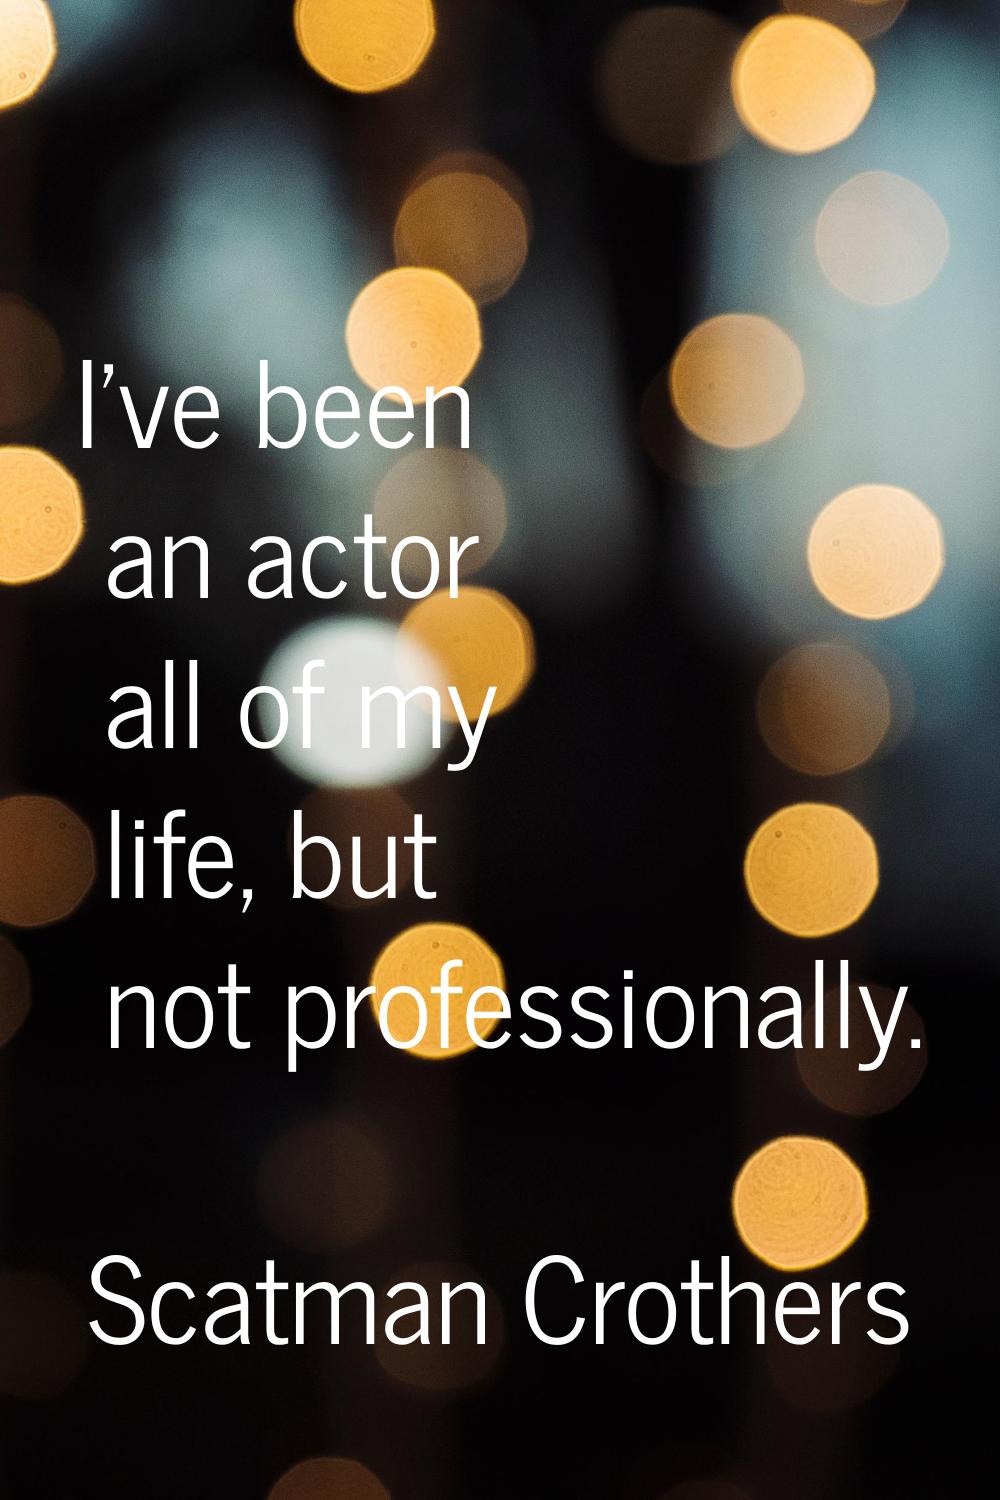 I've been an actor all of my life, but not professionally.